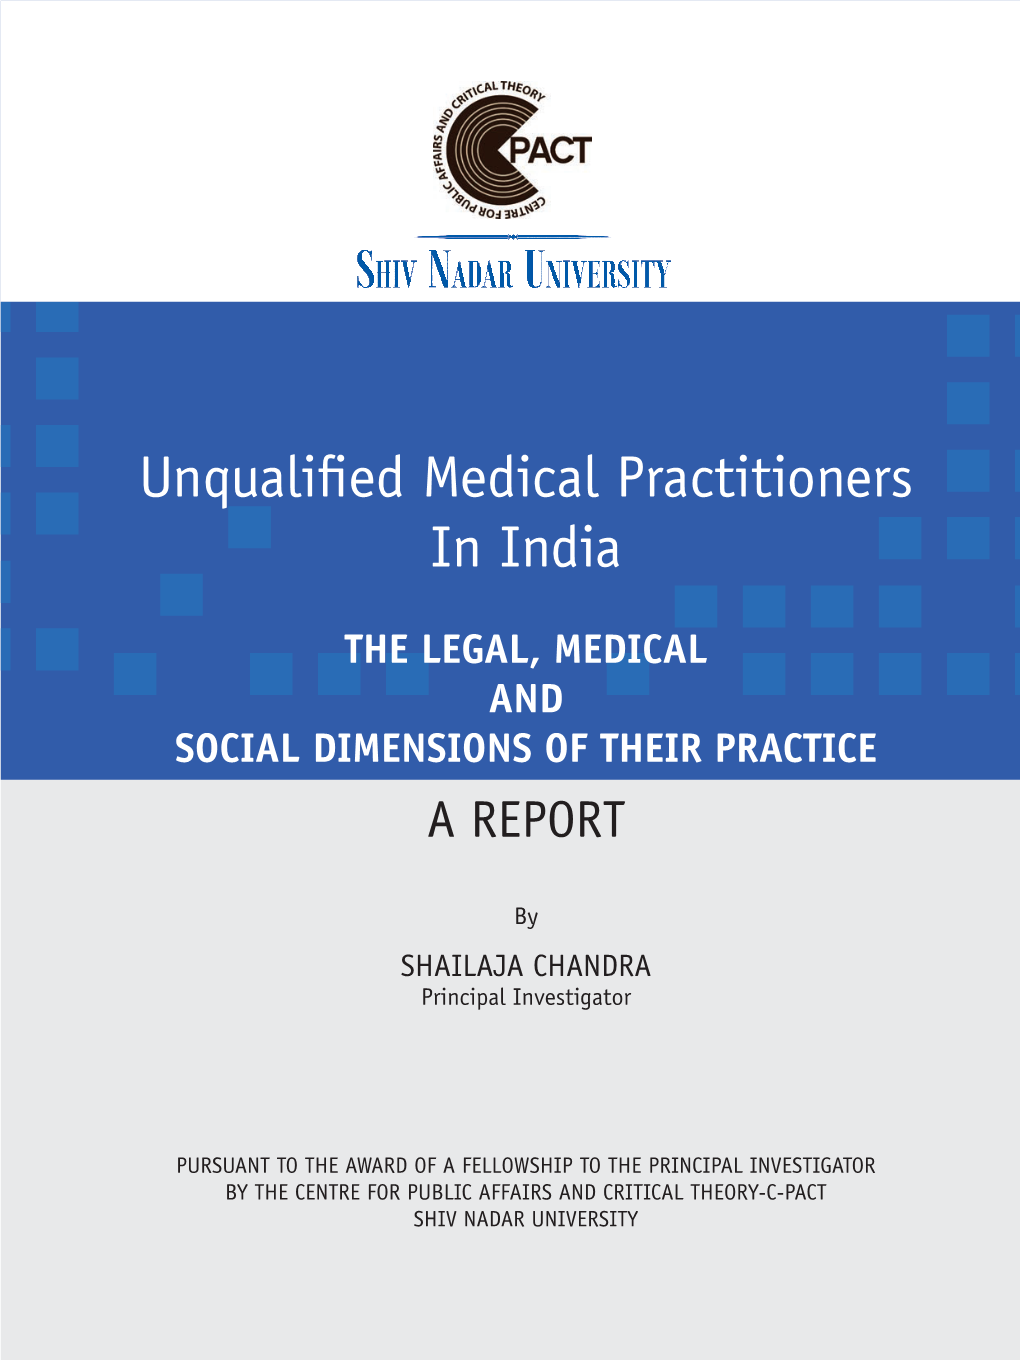 Unqualified Medical Practitioners in India I